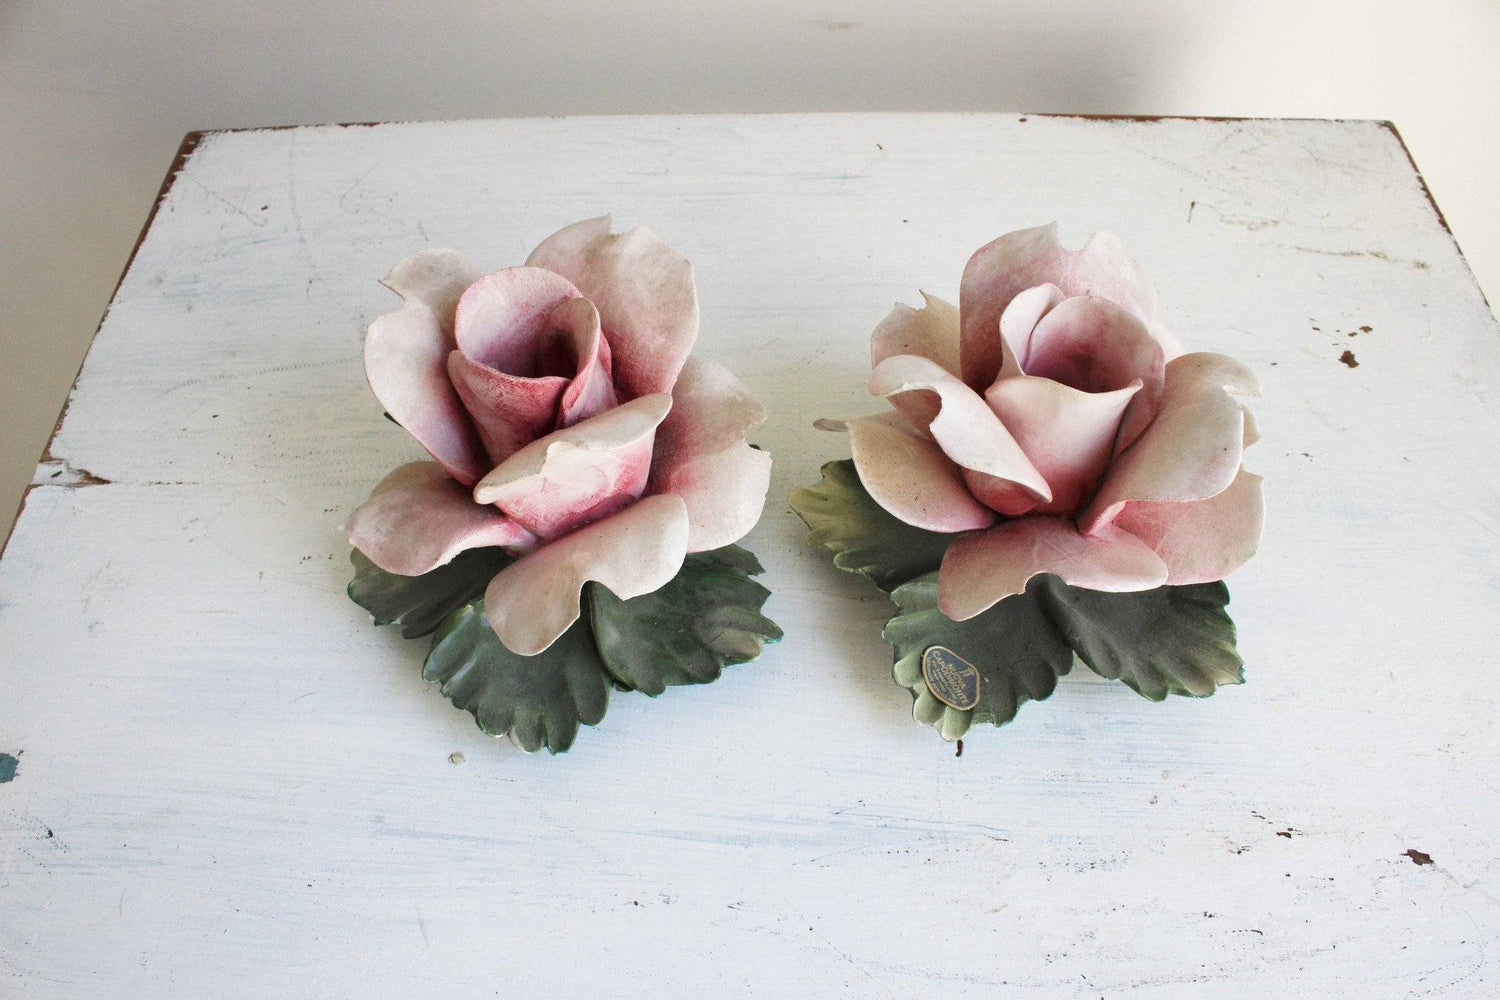 Vintage 1960s Porcelain Rose Candle Holders, Nuova Capodimonte-Mint Chips Vintage Home Goods-Candle Holder,Candleholder,Collectible,Nuova Capodimonte,Pink,Porcelain,Rose,Vintage